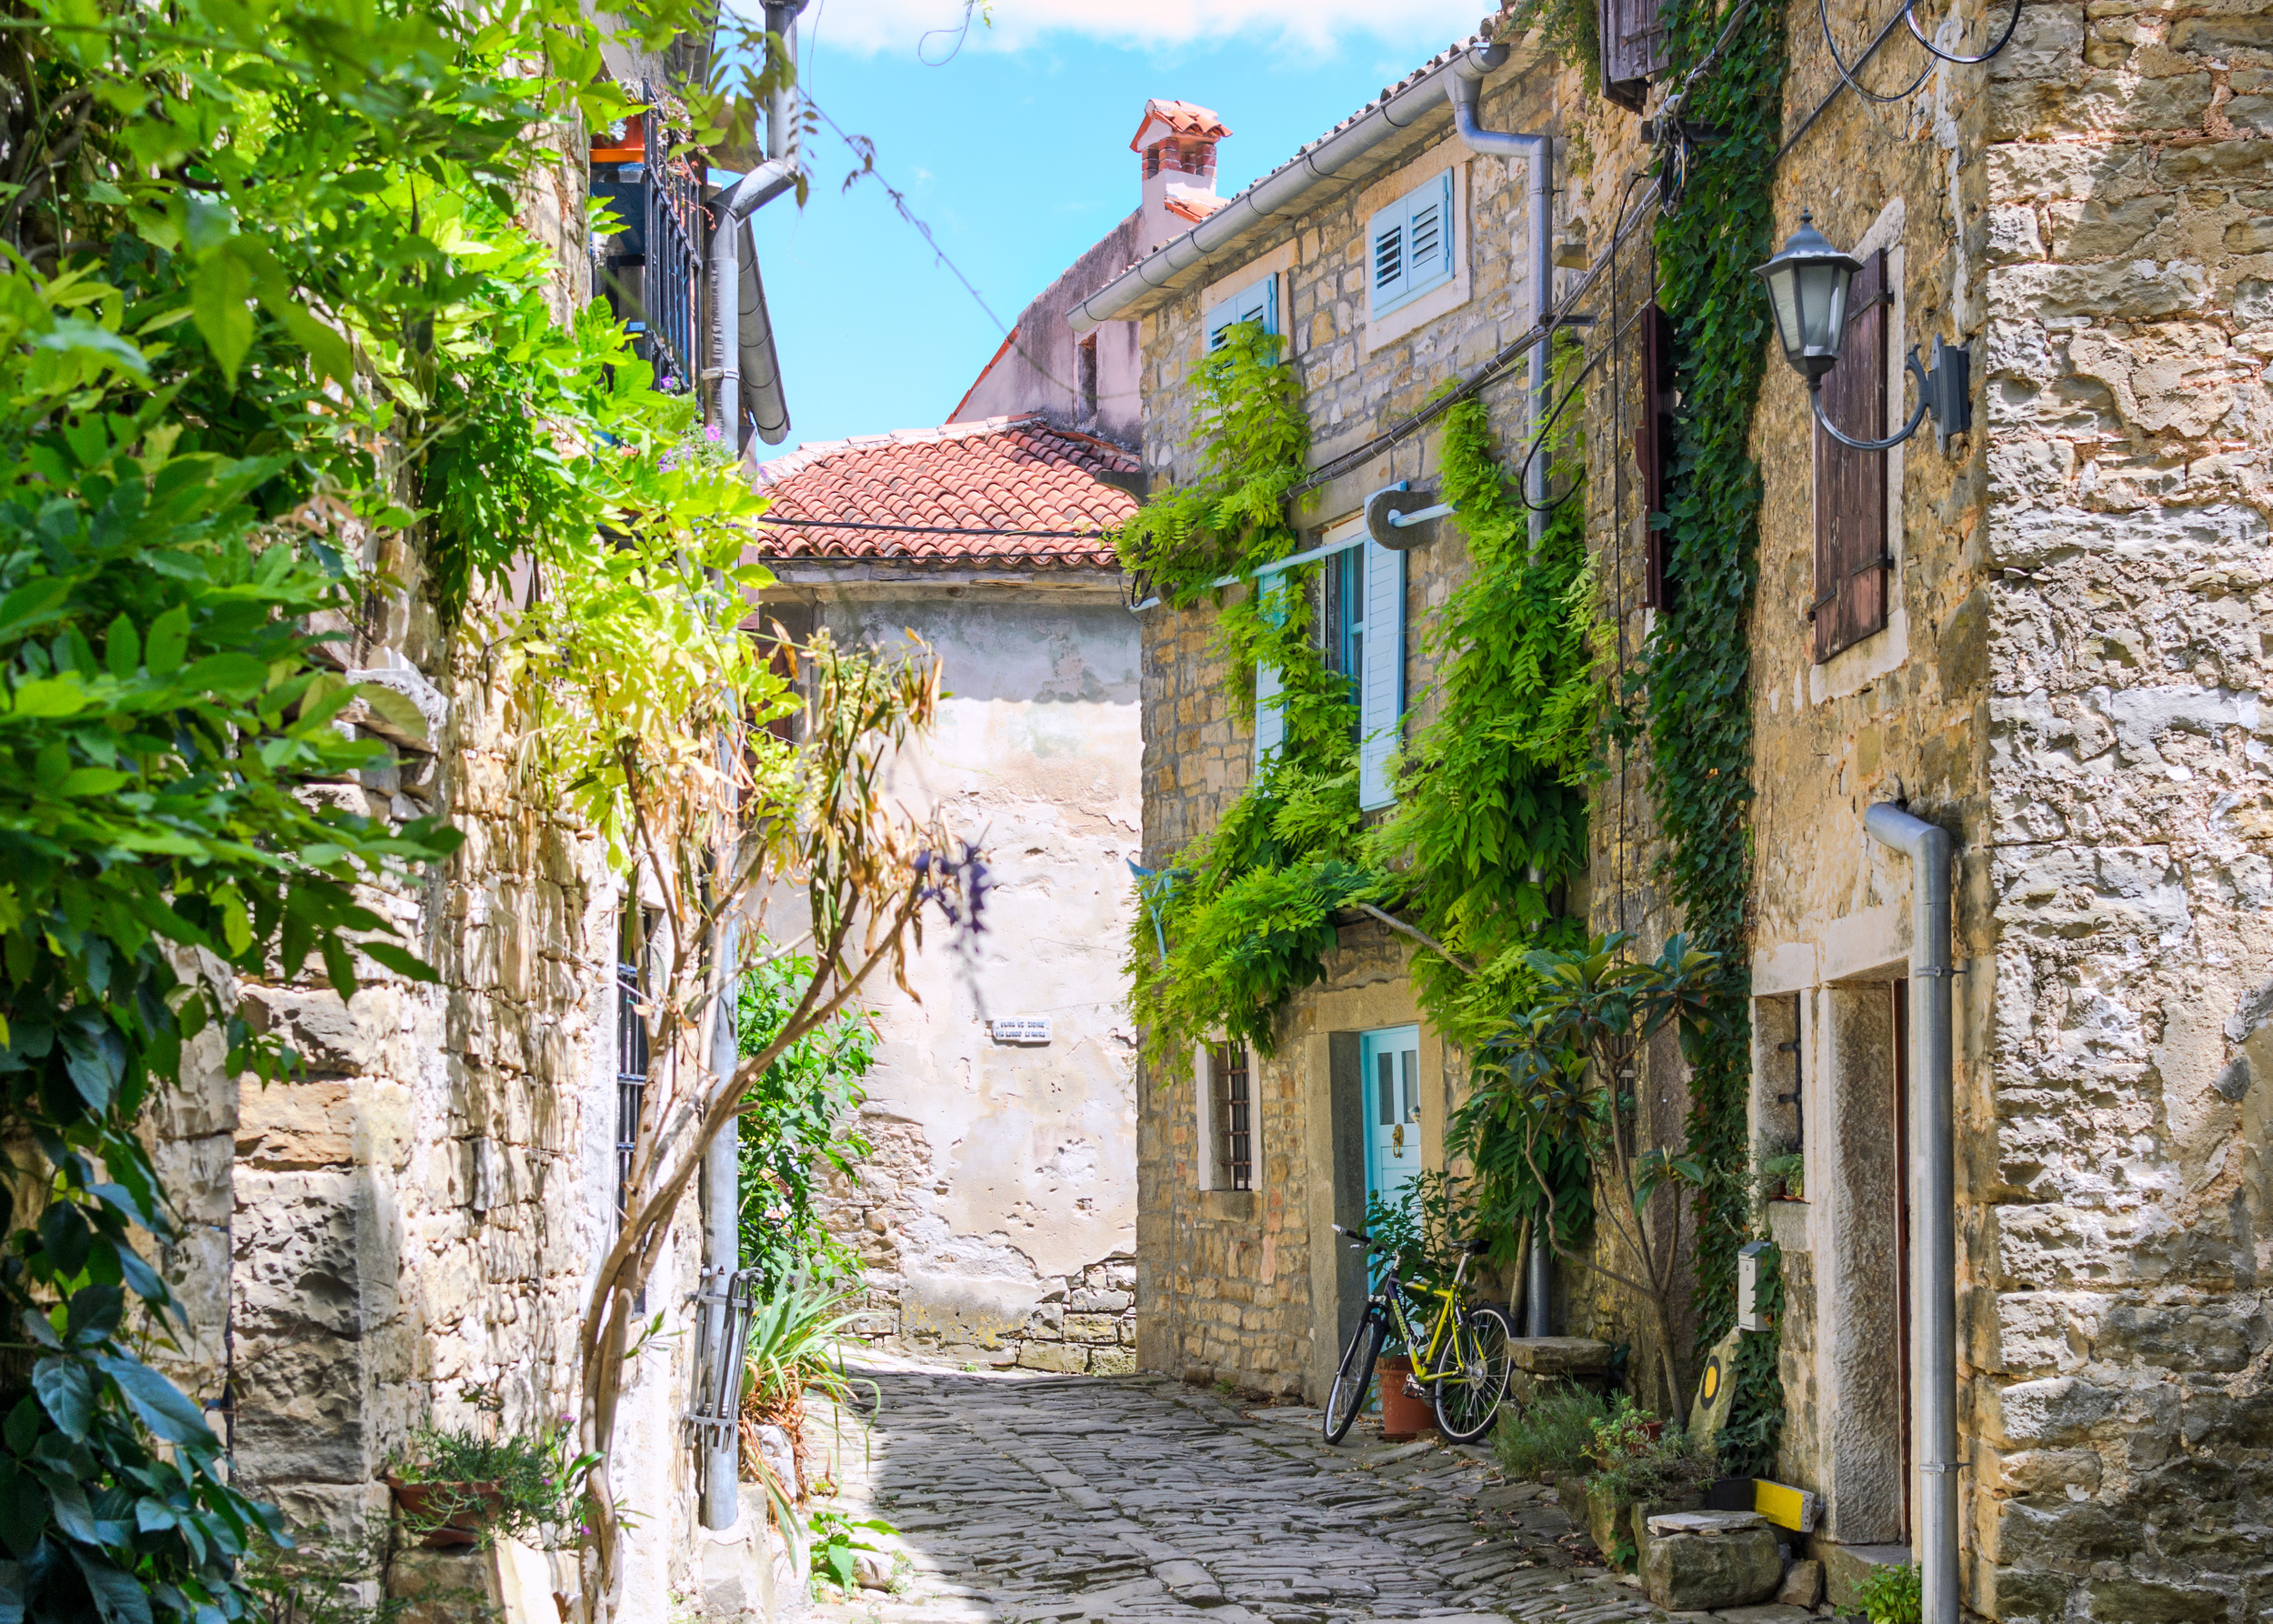 <p>Arguably Istria’s most interesting location, the town is like a mini-fairytale version of Motovun. On a hill, Grožnjan houses a music school and several galleries. Thus it’s common to hear notes playing throughout the streets as you stroll.</p><p>You may also like: <a href='https://www.yardbarker.com/lifestyle/articles/the_20_best_small_towns_in_europe_022124/s1__38397859'>The 20 best small towns in Europe</a></p>